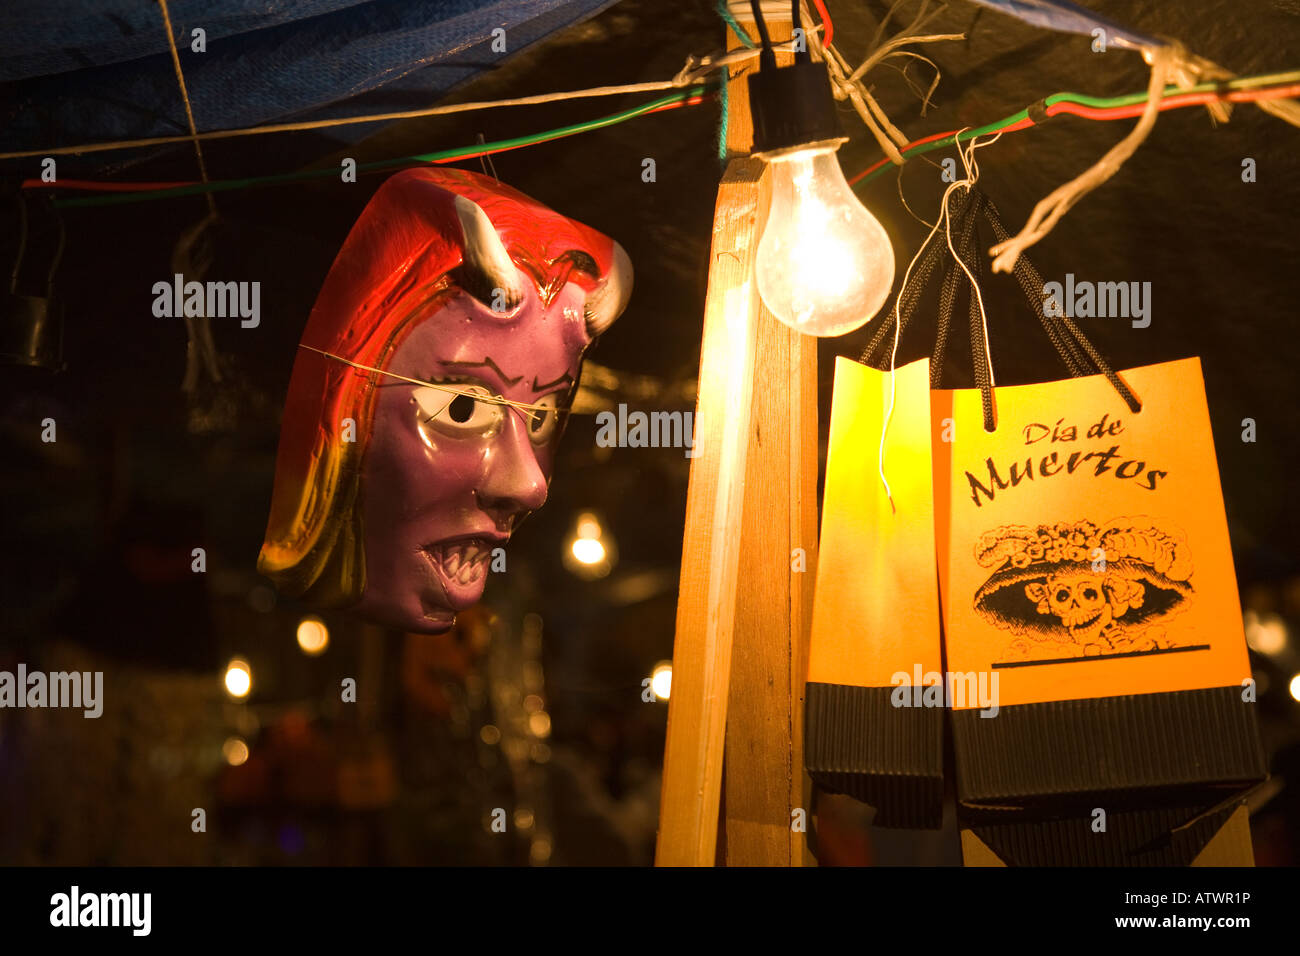 MEXICO Guanajuato Shopping bag for Day of the Dead scary female mask at night lightbulb in booth Stock Photo